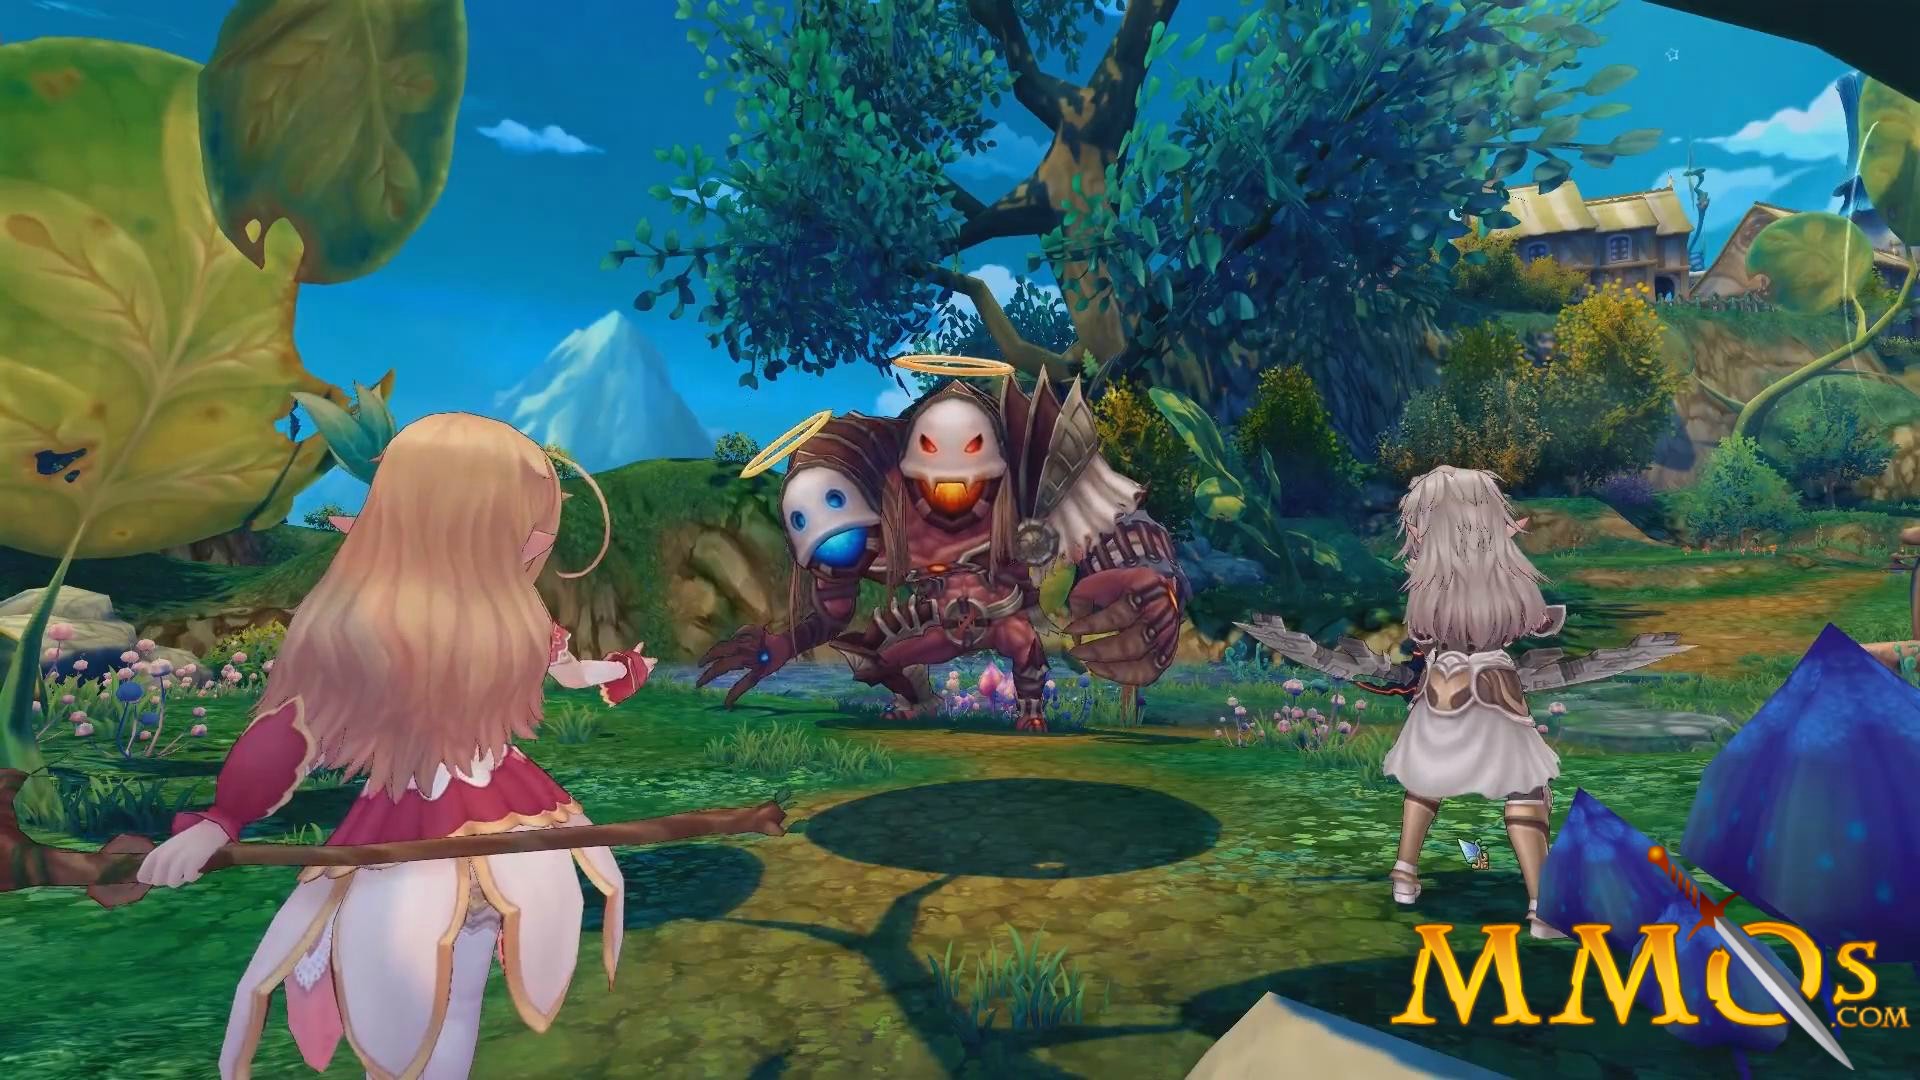 11 best anime MMORPG games on PC for fans of Far East culture